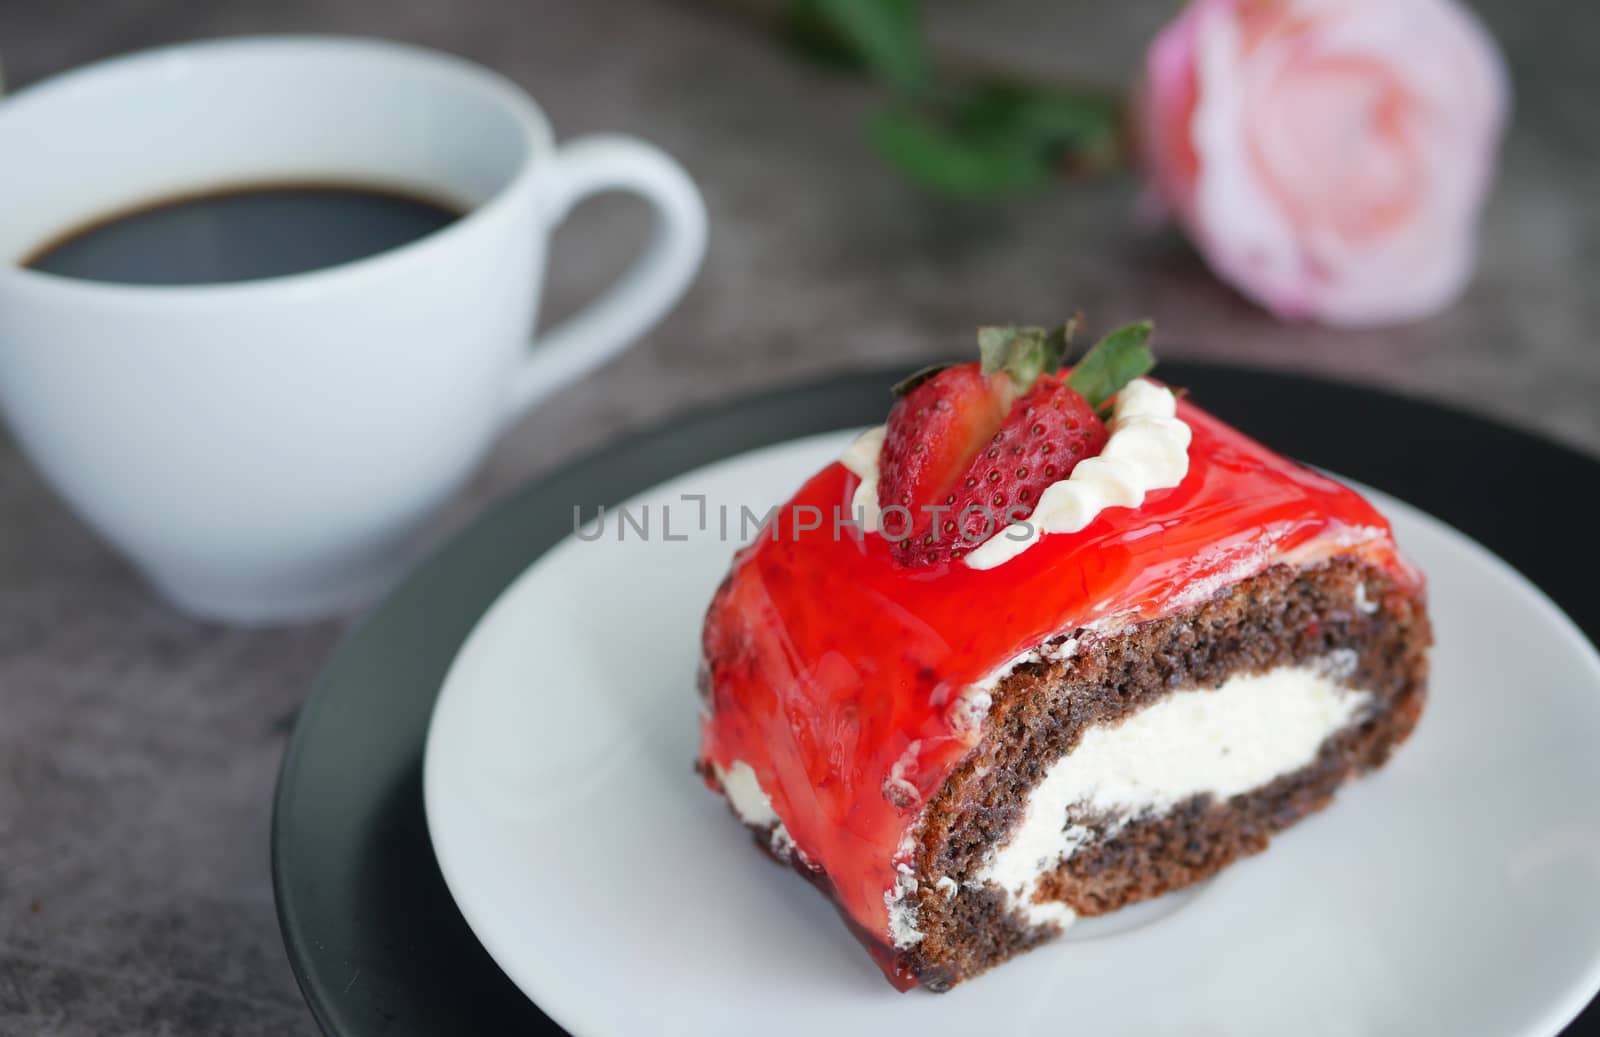 chocolate cake with strawberry jam sauce topped with whipped cream and fresh strawberry chopped served on white plate with a cup of black coffee, blur rose at background